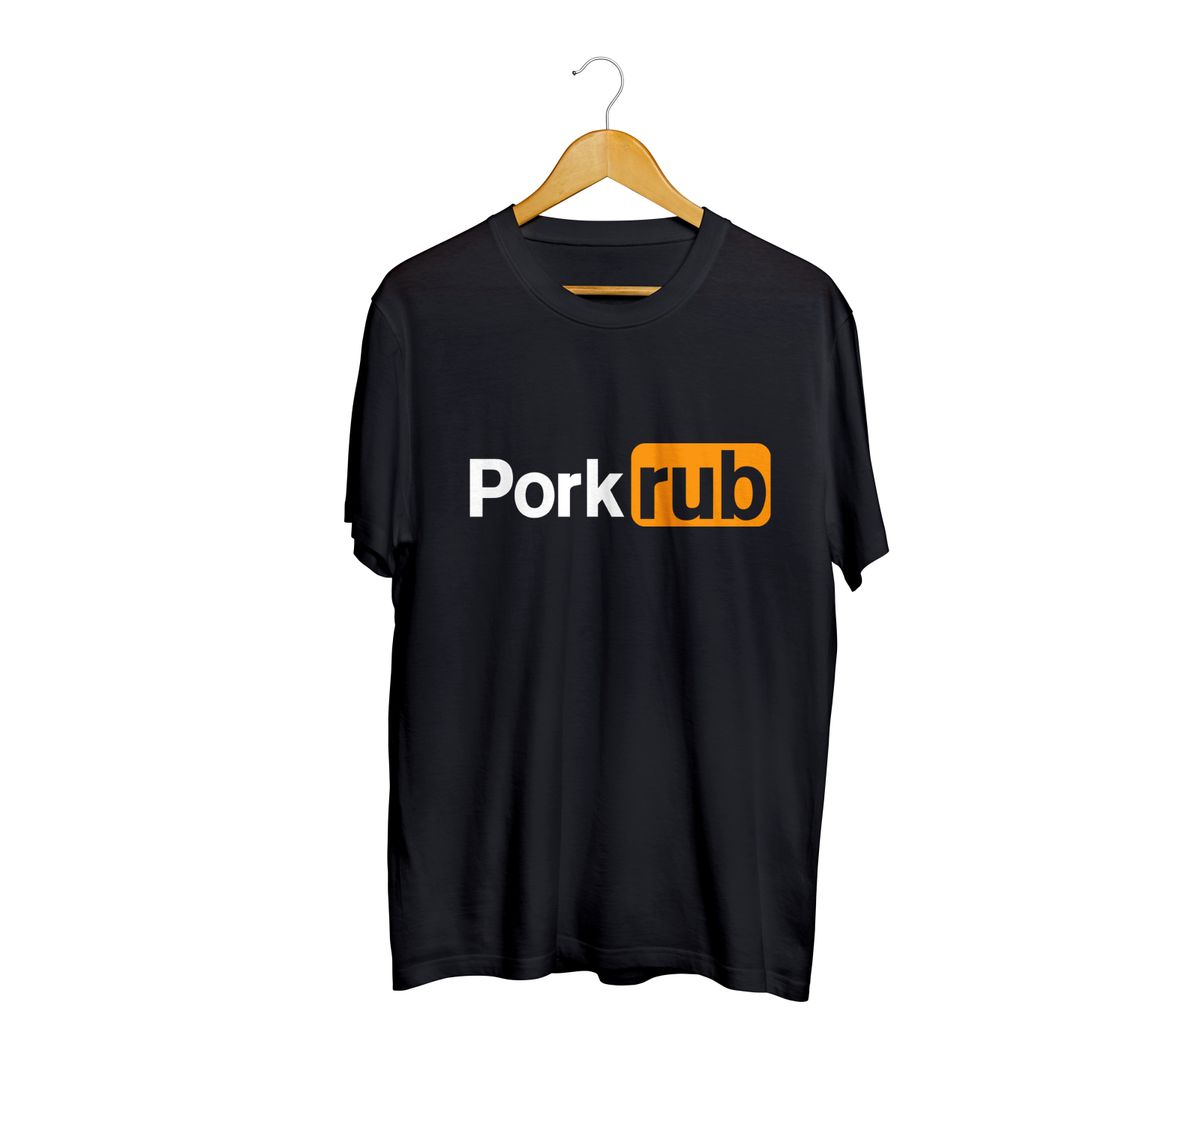 Fan Made Fits Barbeque Black Rub T-Shirt image 1